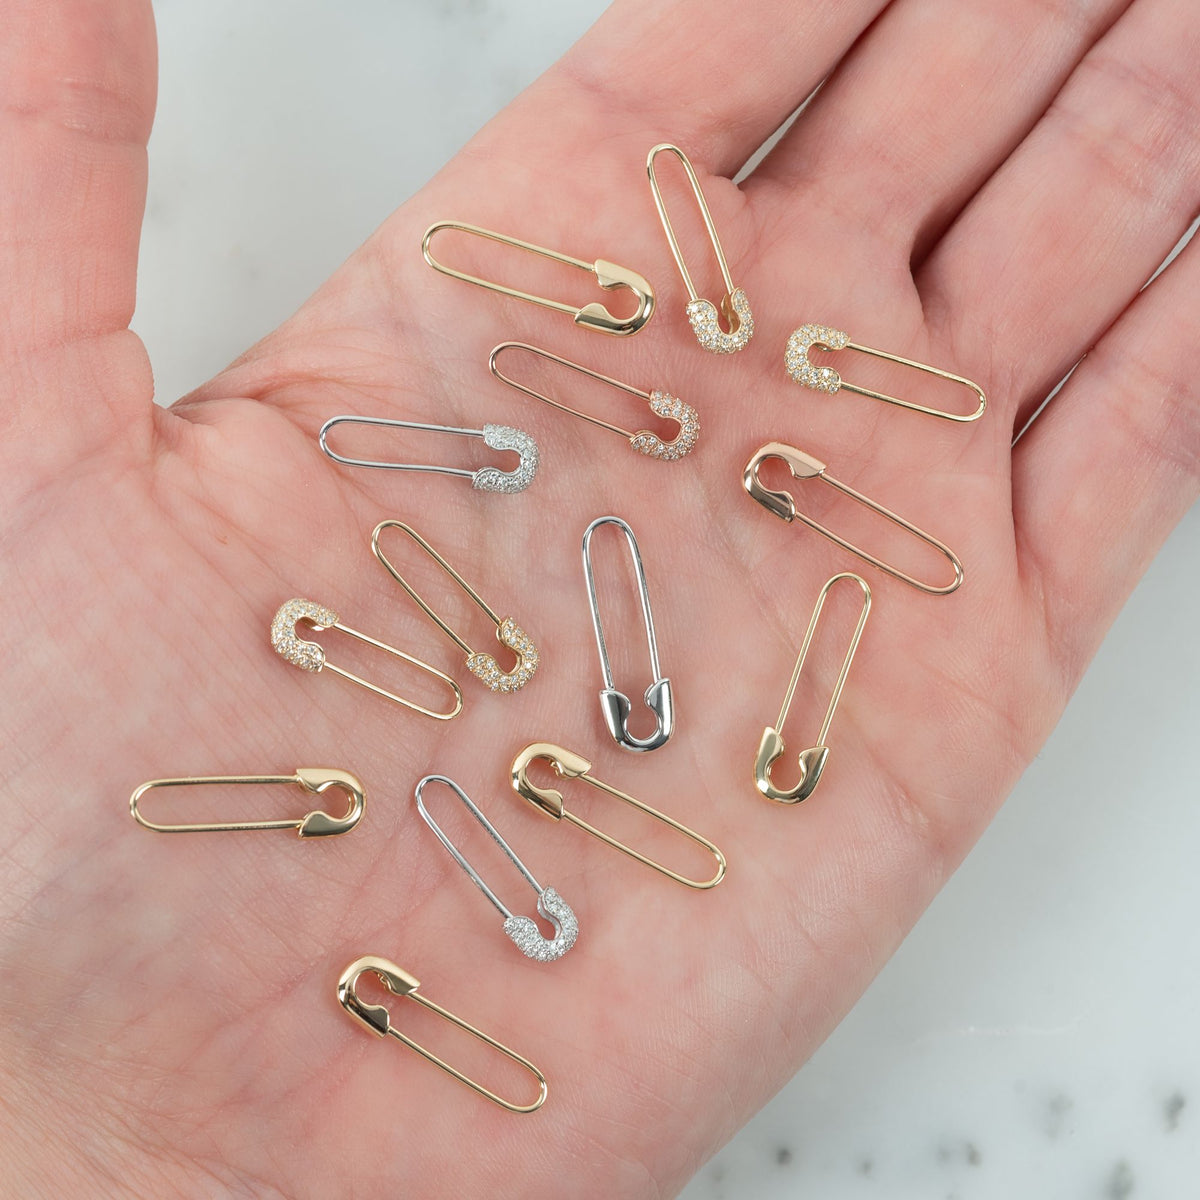 Gold Safety Pins -  Israel